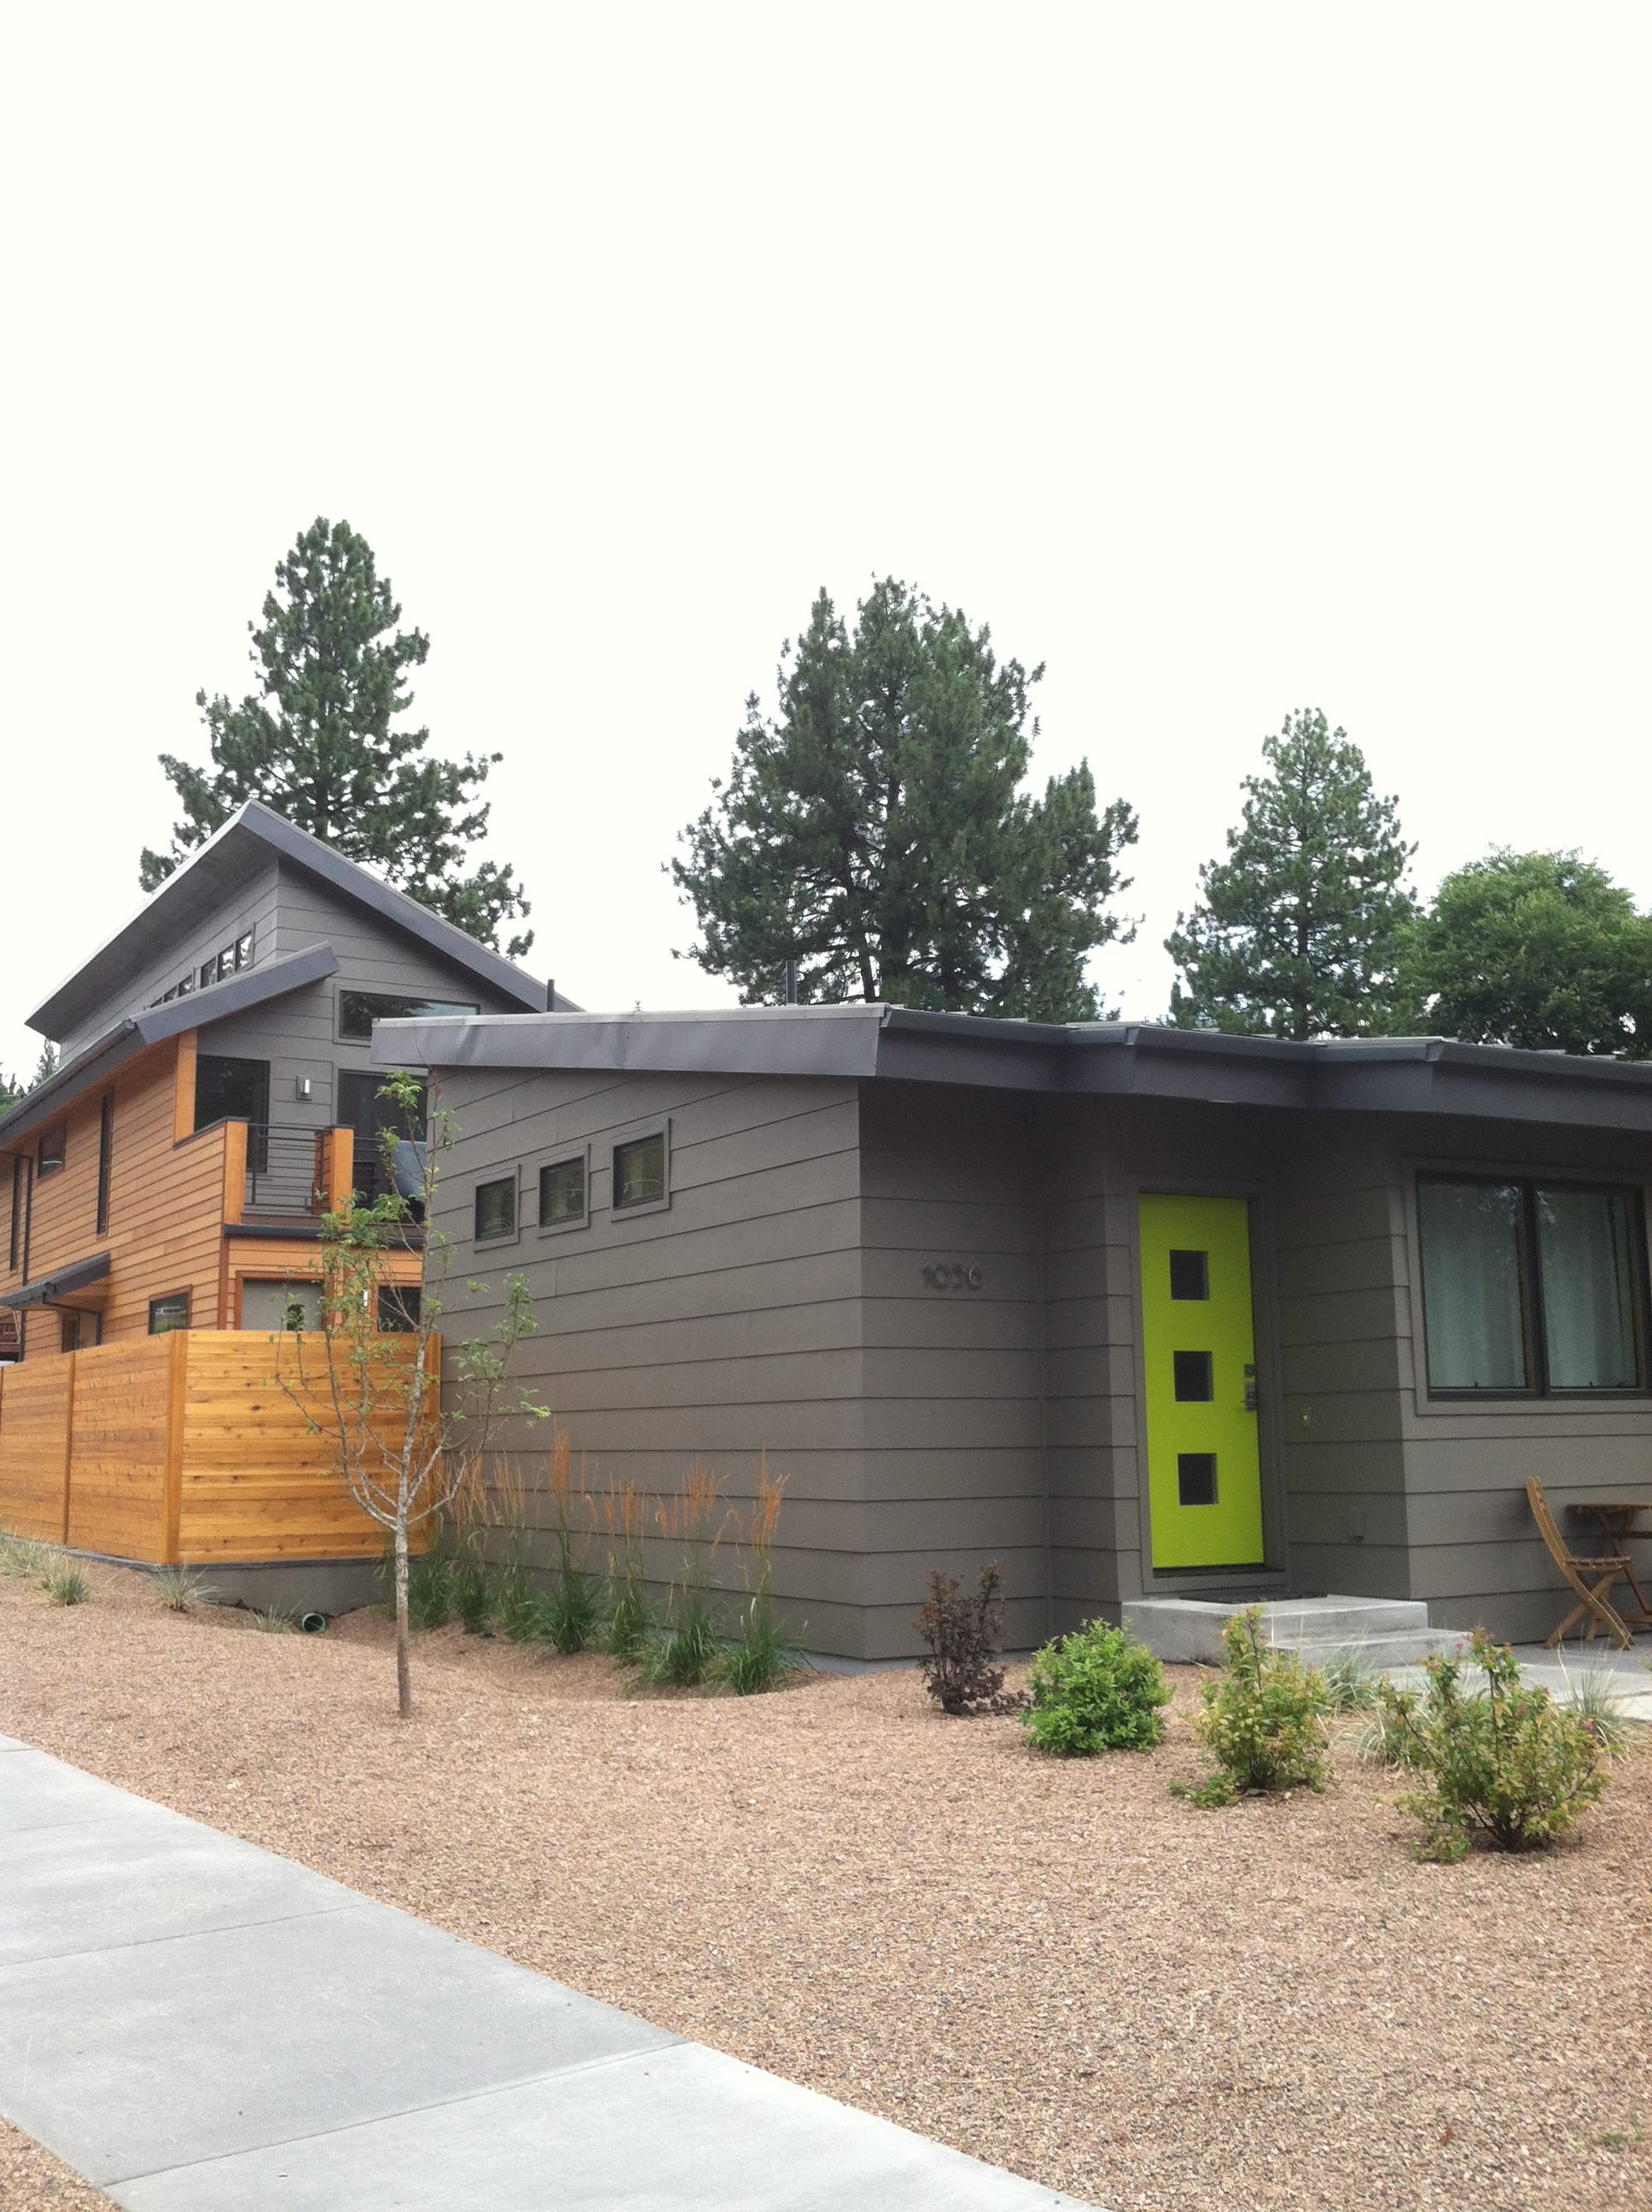 An accessory dwelling, also known as mother-in-law apartments, is seen Aug. 13 at a home in Bend, Ore. Bend is looking for strategies to ease the shortage of rental housing in the city.